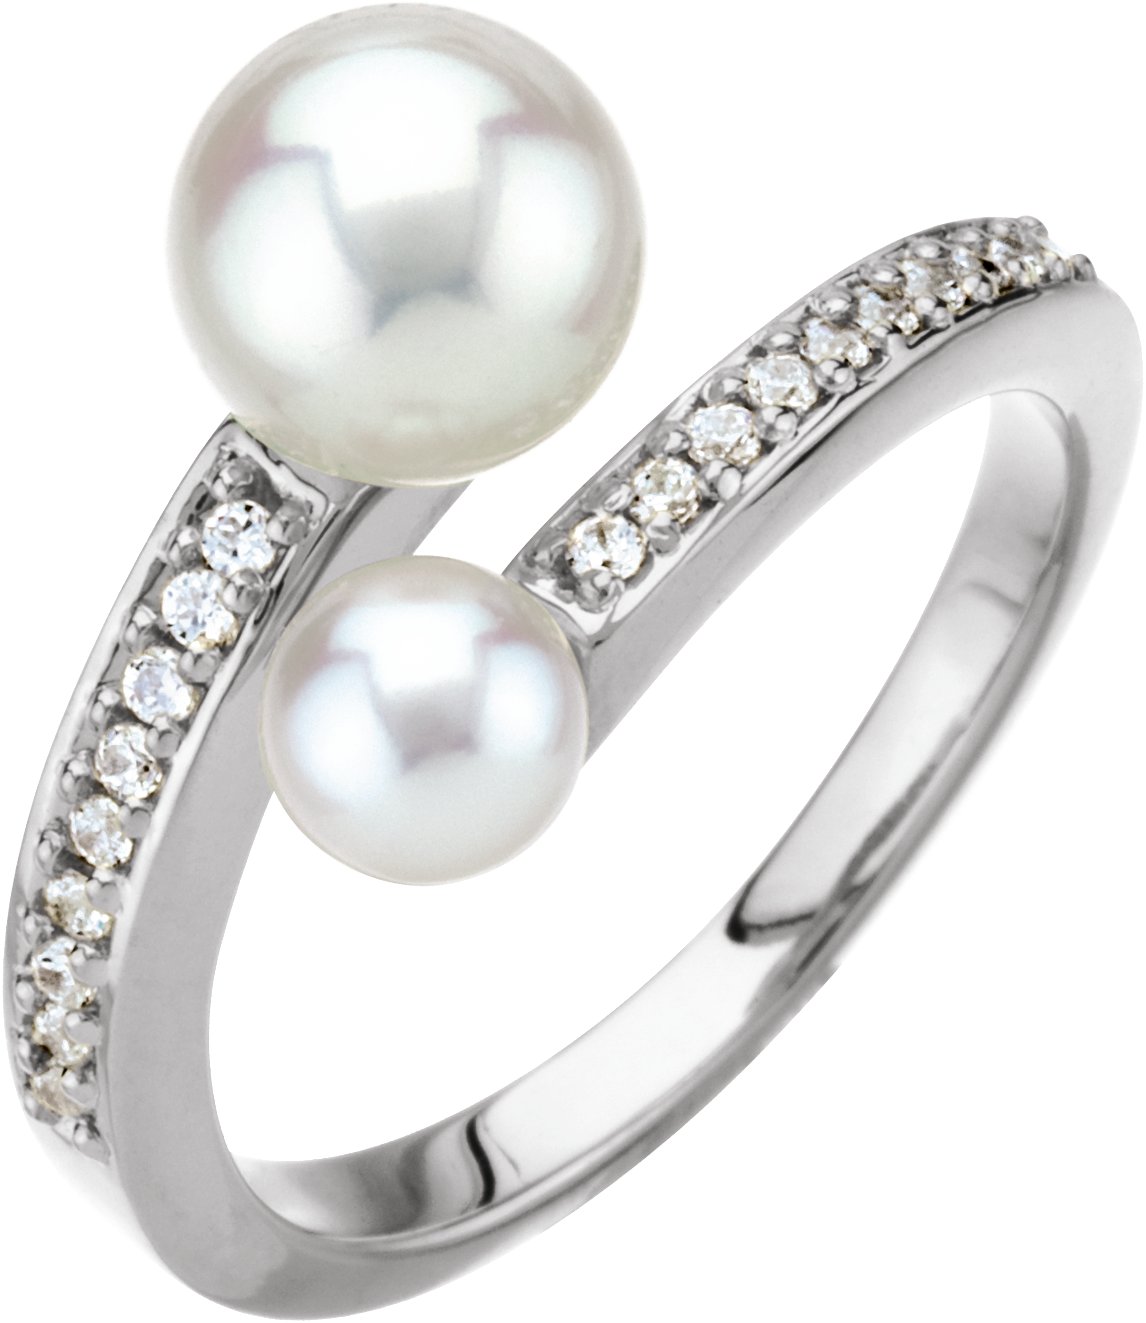 Accented Bypass Ring Mounting for Pearls